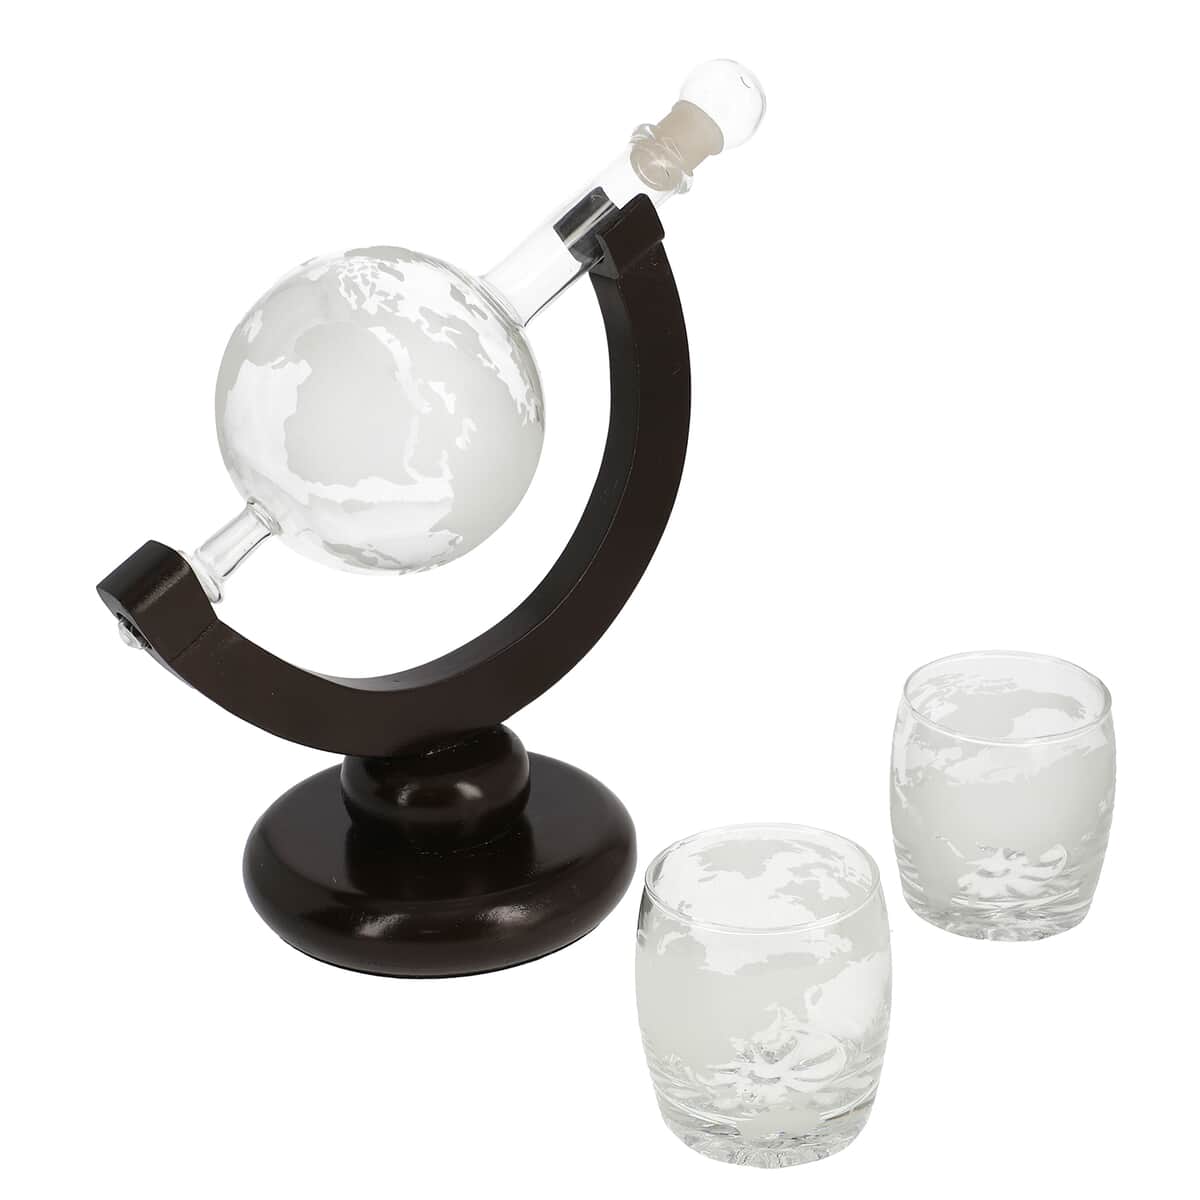 Drinkware Glass Globe Decanter Set with Wooden stand and 2 Whisky Glasses for Liquor, Ideal Bar Decor Gift image number 0